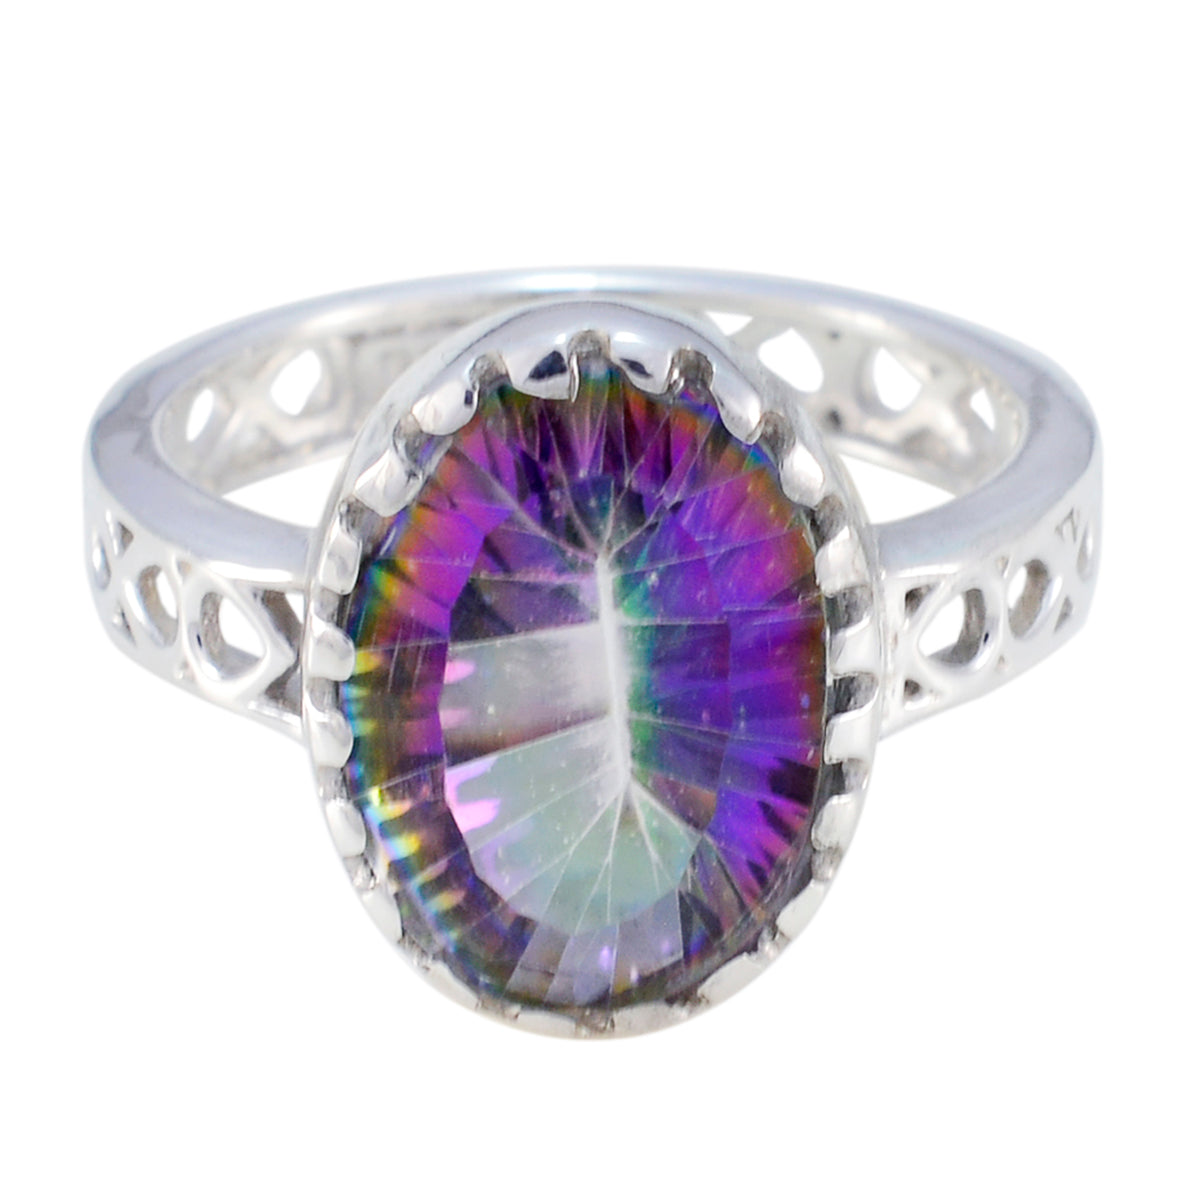 Wholesale Gem Mystic Quartz Sterling Silver Ring Closest Jewelry Store